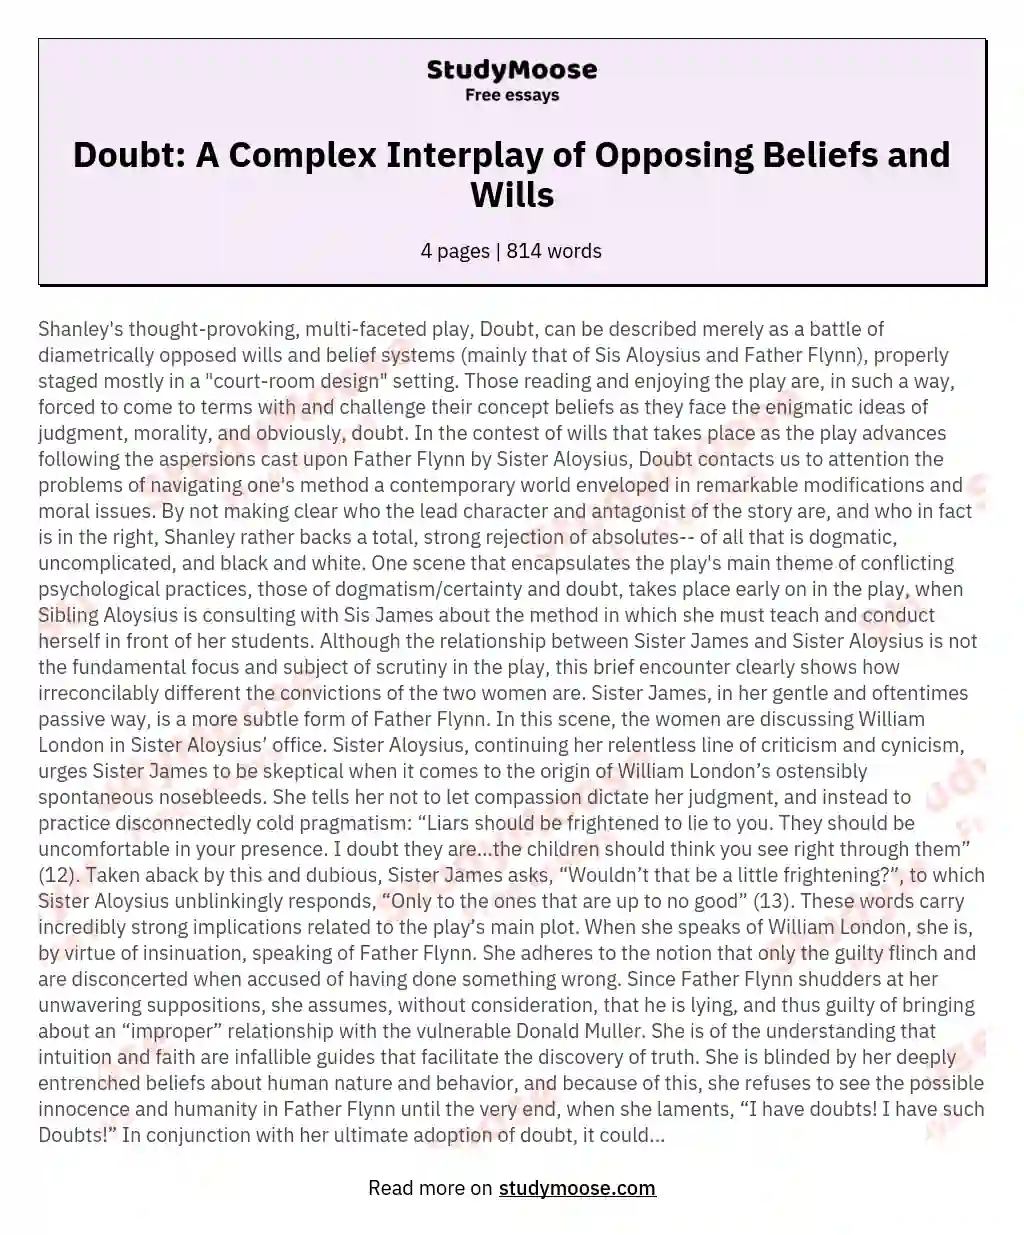 Doubt: A Complex Interplay of Opposing Beliefs and Wills essay